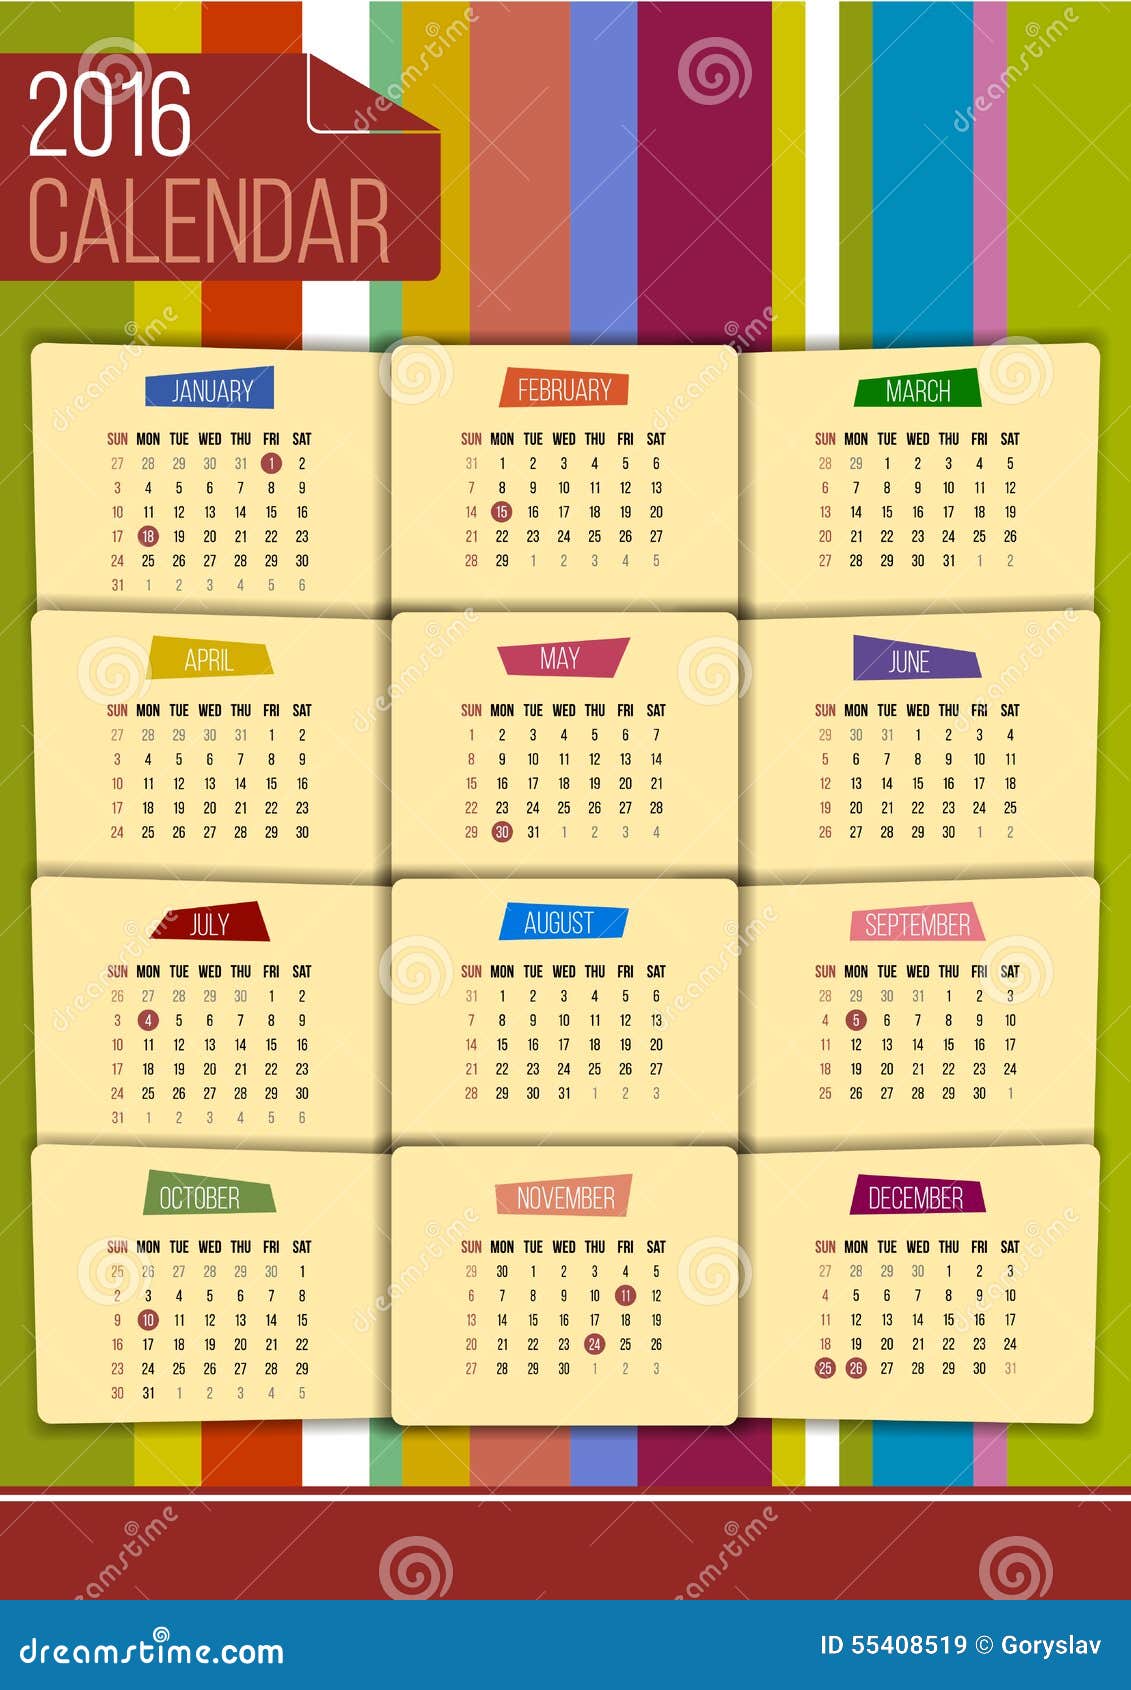 Calendar Template 2016 With Holidays from thumbs.dreamstime.com